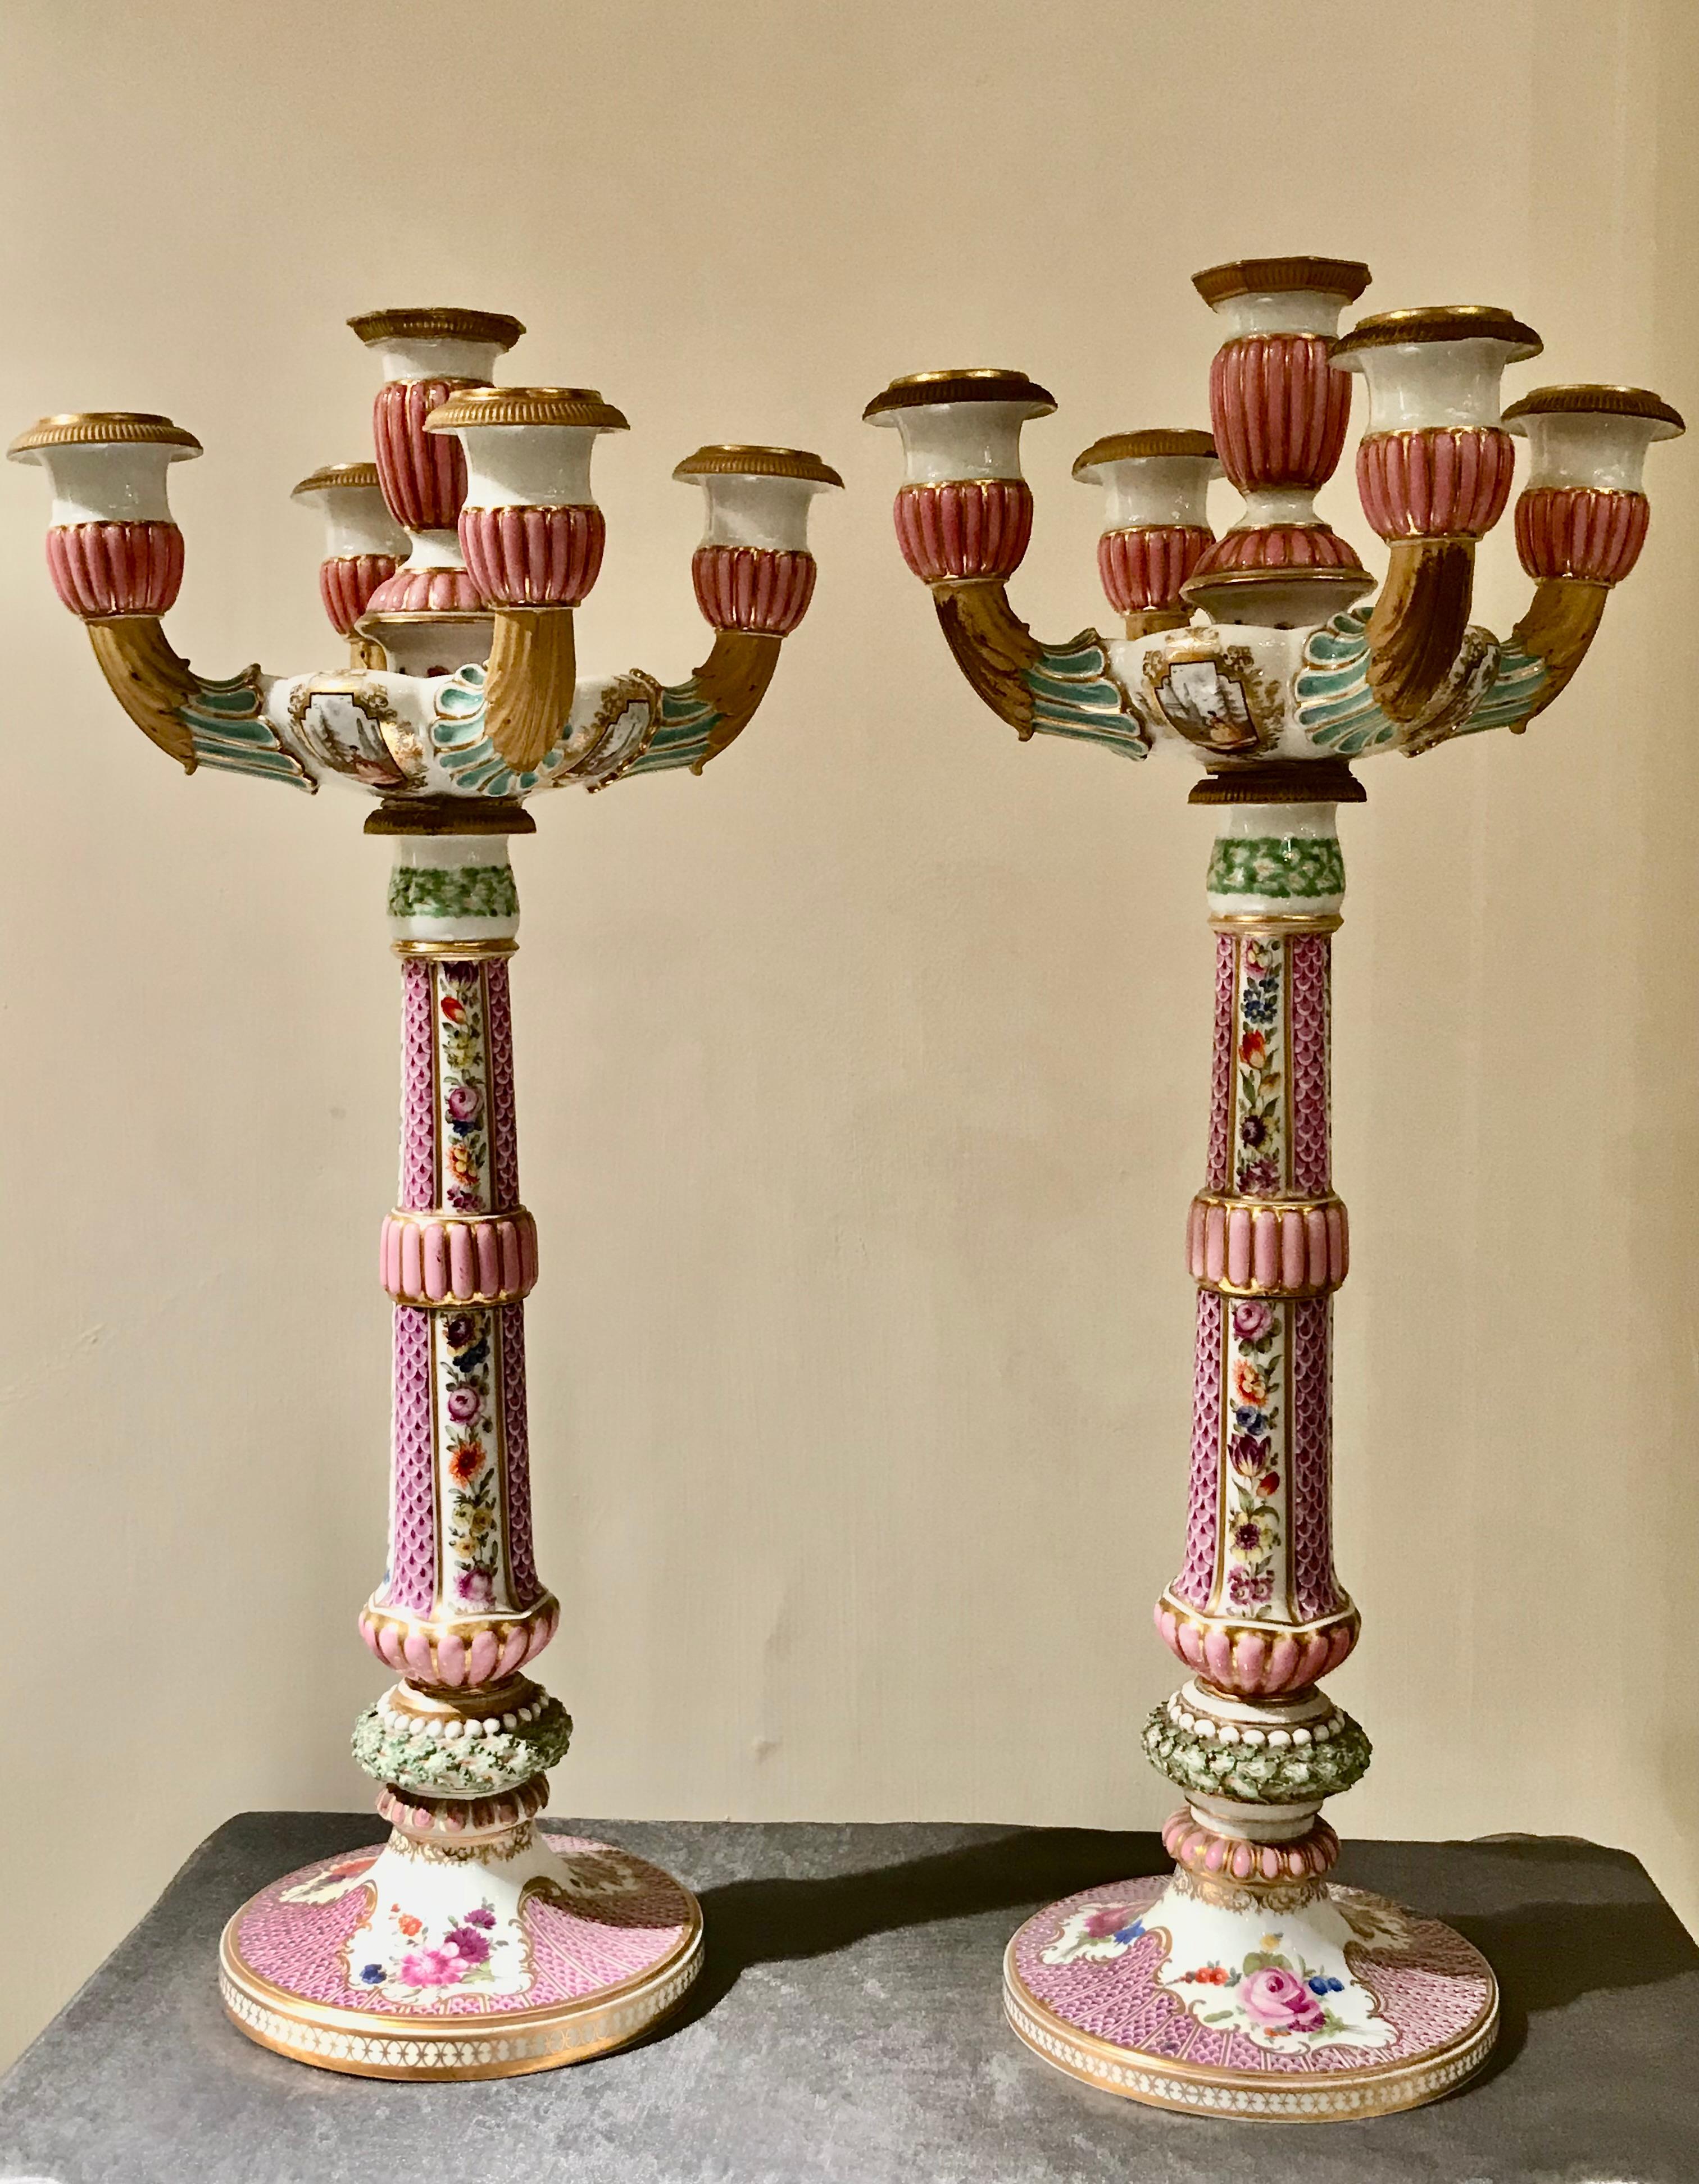 Fine work of good expressive power. Spectacular Pair of Girandoles/Table candlesticks made of Porcelain is from Meissen, Germany, marked with sword mark. Approx. 1790 - 1810, Marcolini-period.